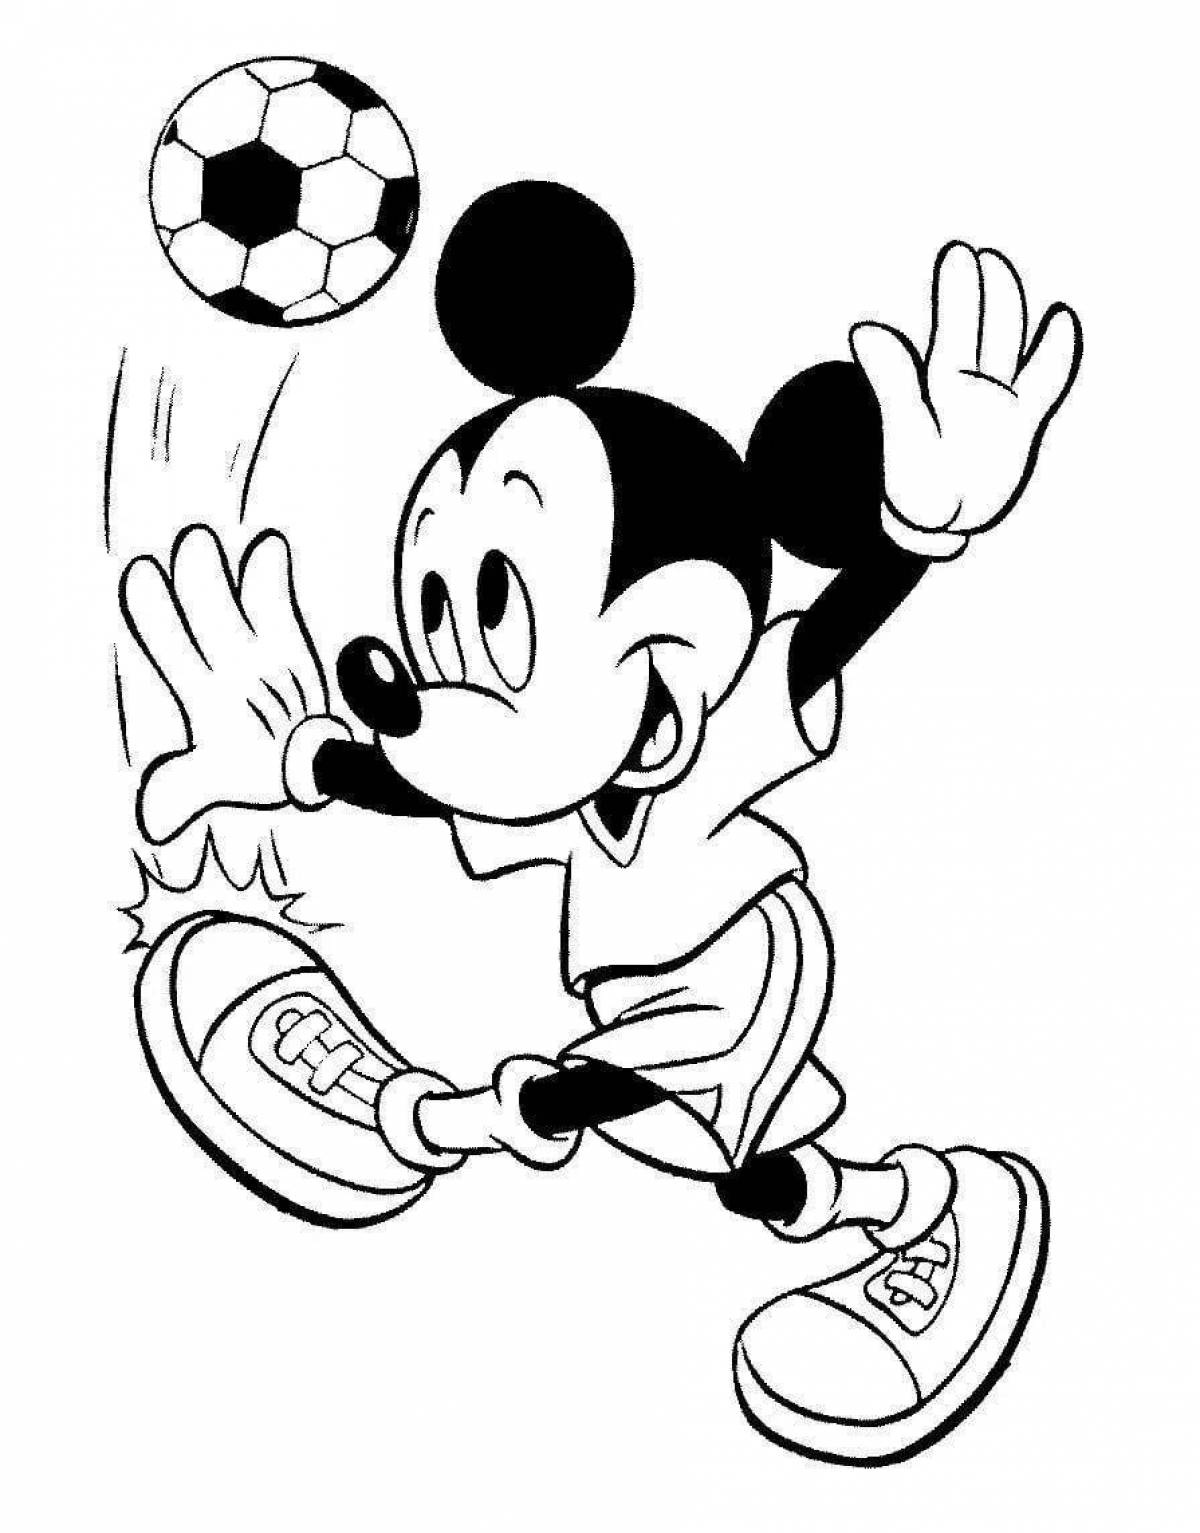 Mickey mouse inspirational coloring book